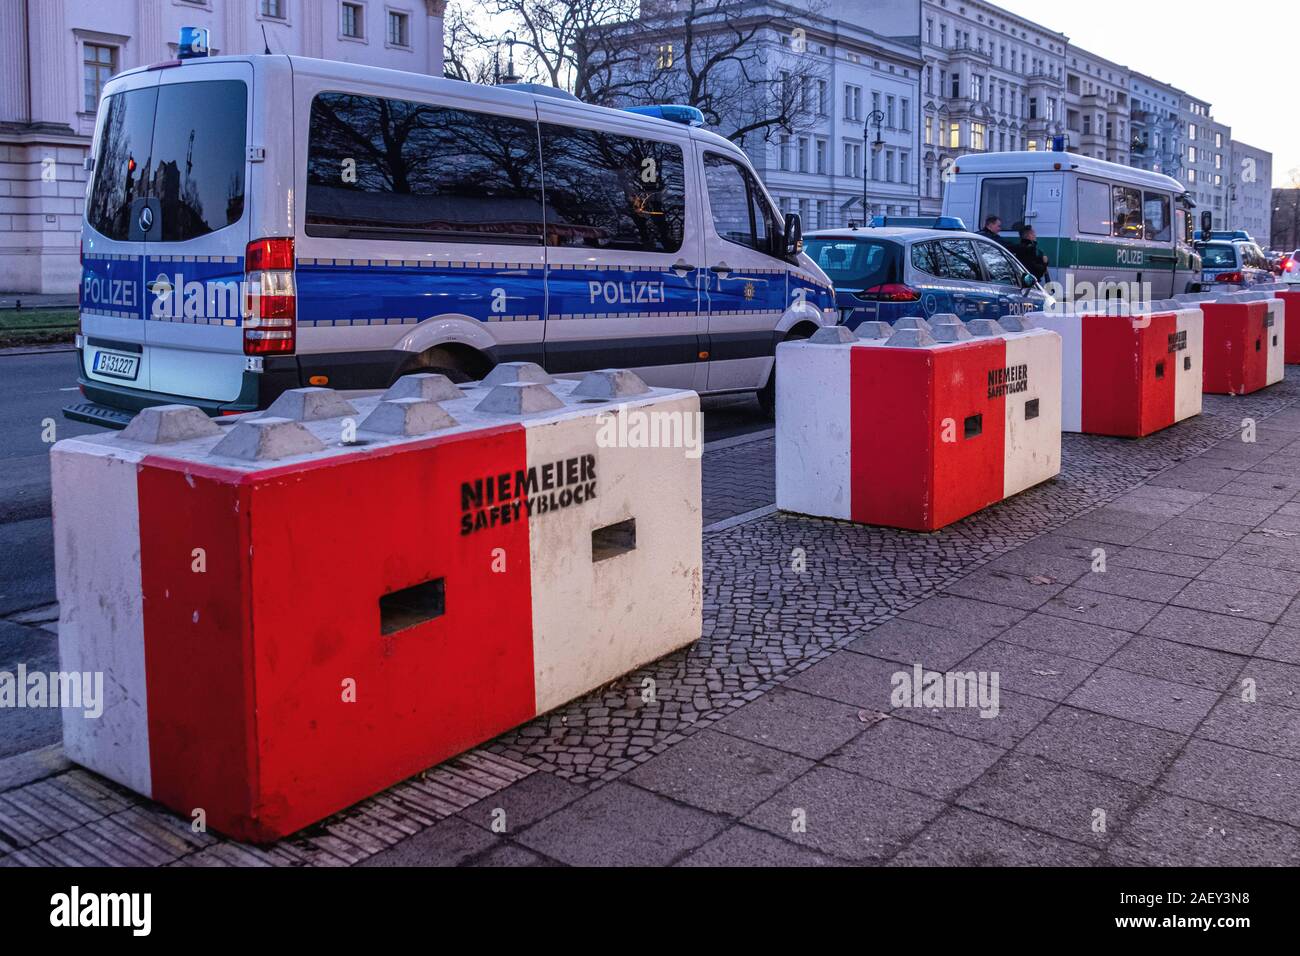 Concrete safety Bollards & Police vans outside Traditional German Christmas  market at Schloss Charlottenburg Palace in Berlin Stock Photo - Alamy